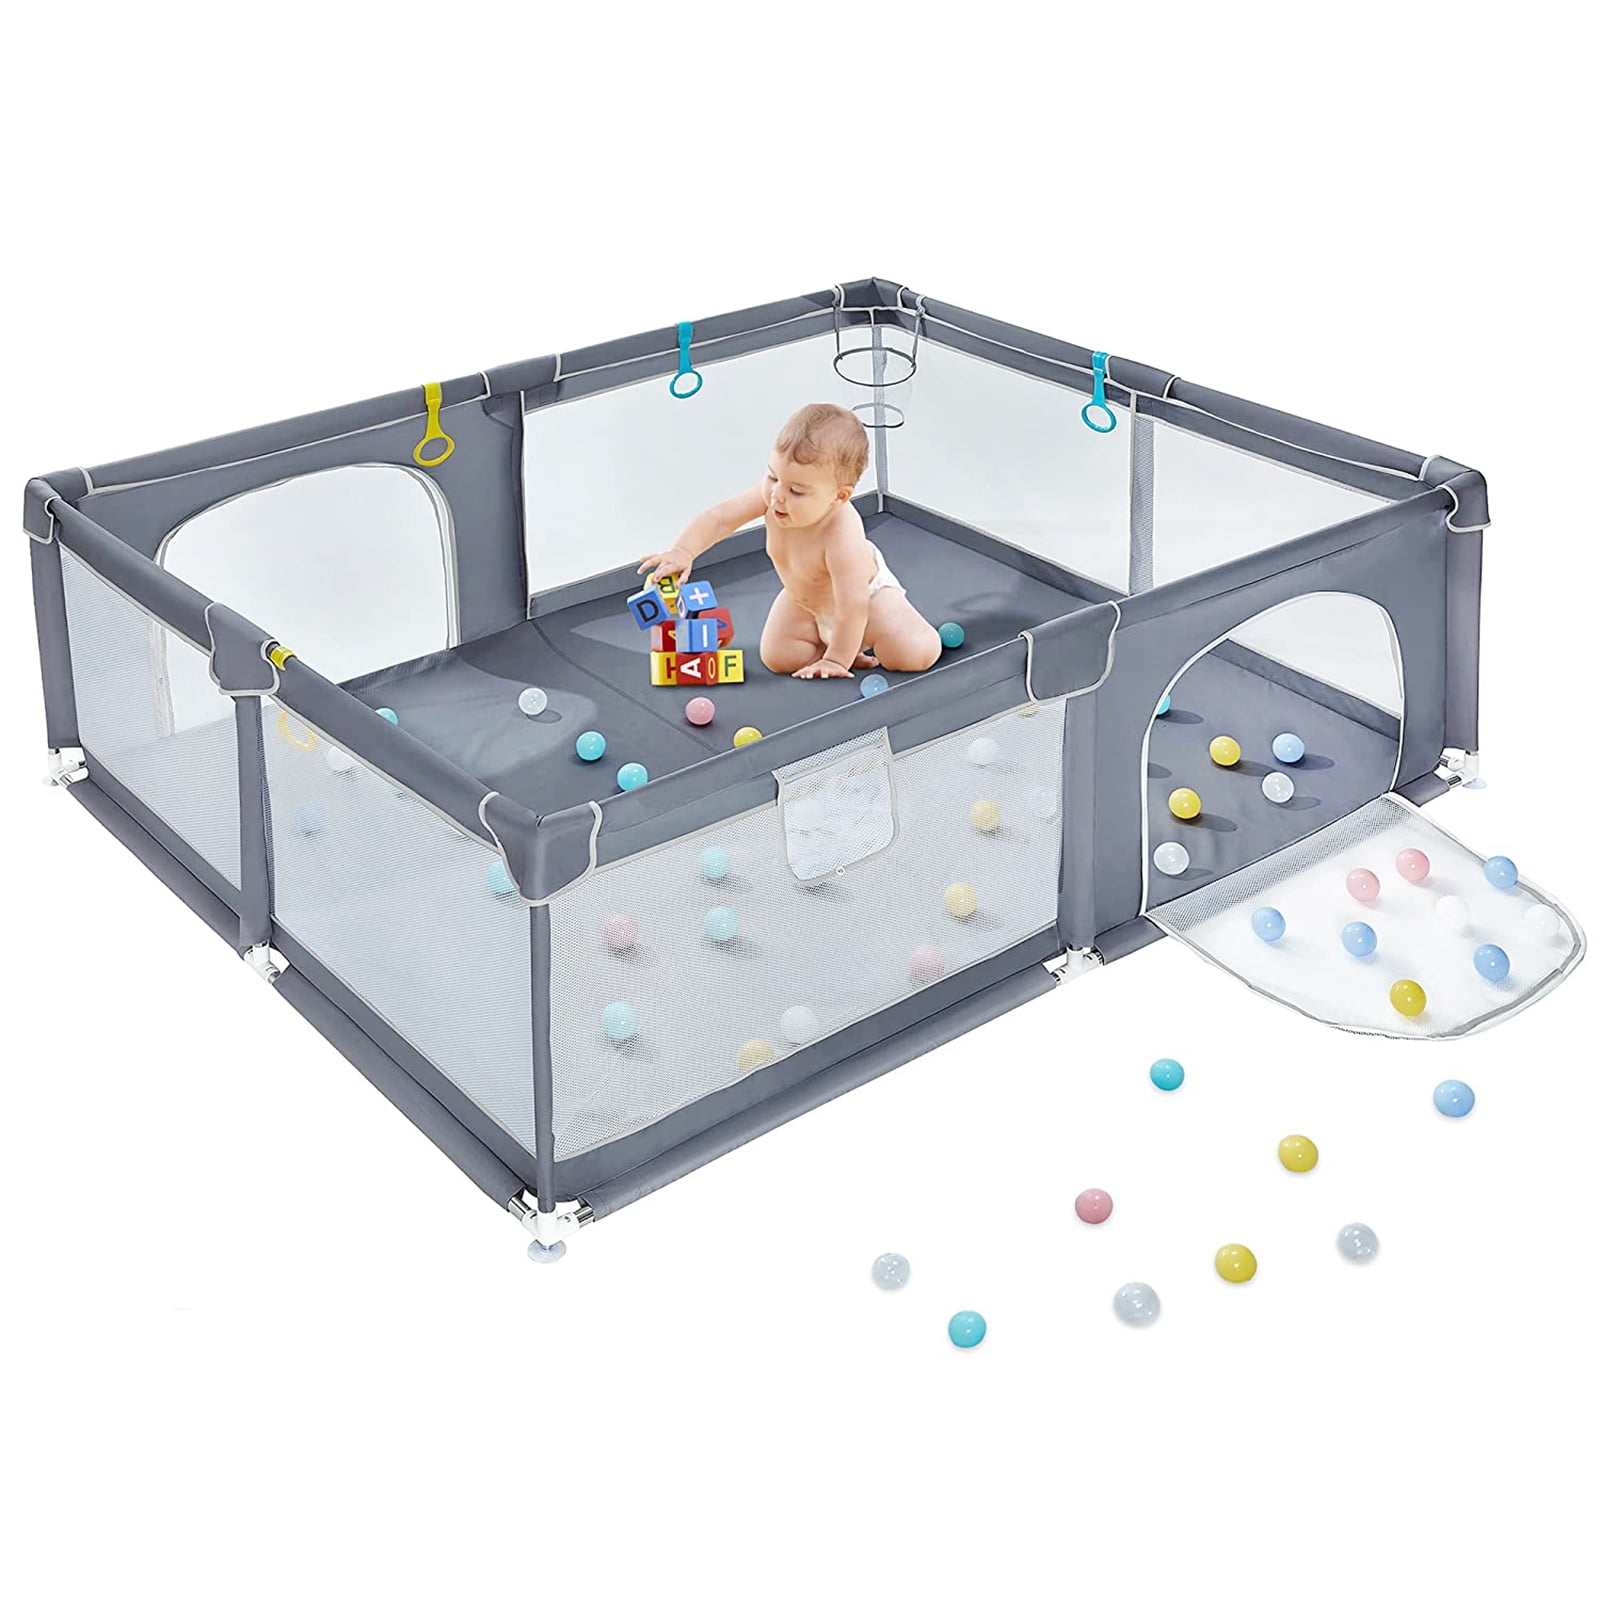 Sturdy Safety Playpen with Thickened Pipes+ Anti-Slip Suckers+ Super Soft Breathable Mesh Dark Gray, X-Large Reliable Activity Center for Infant Baby Playpen Extra Large Playyard for Toddler 